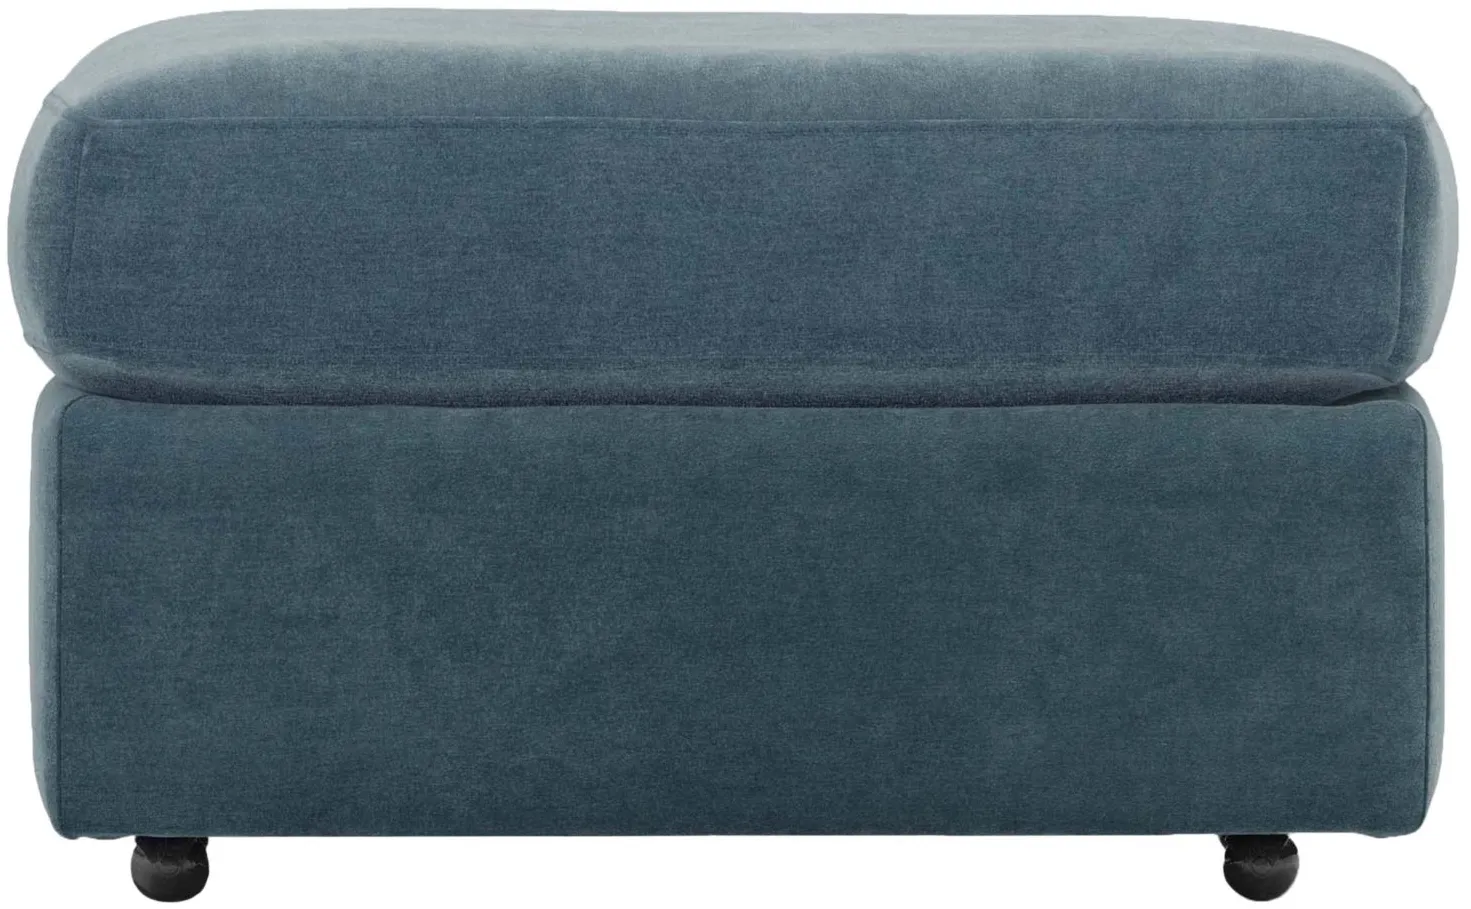 ModularOne Ottoman in Teal by H.M. Richards